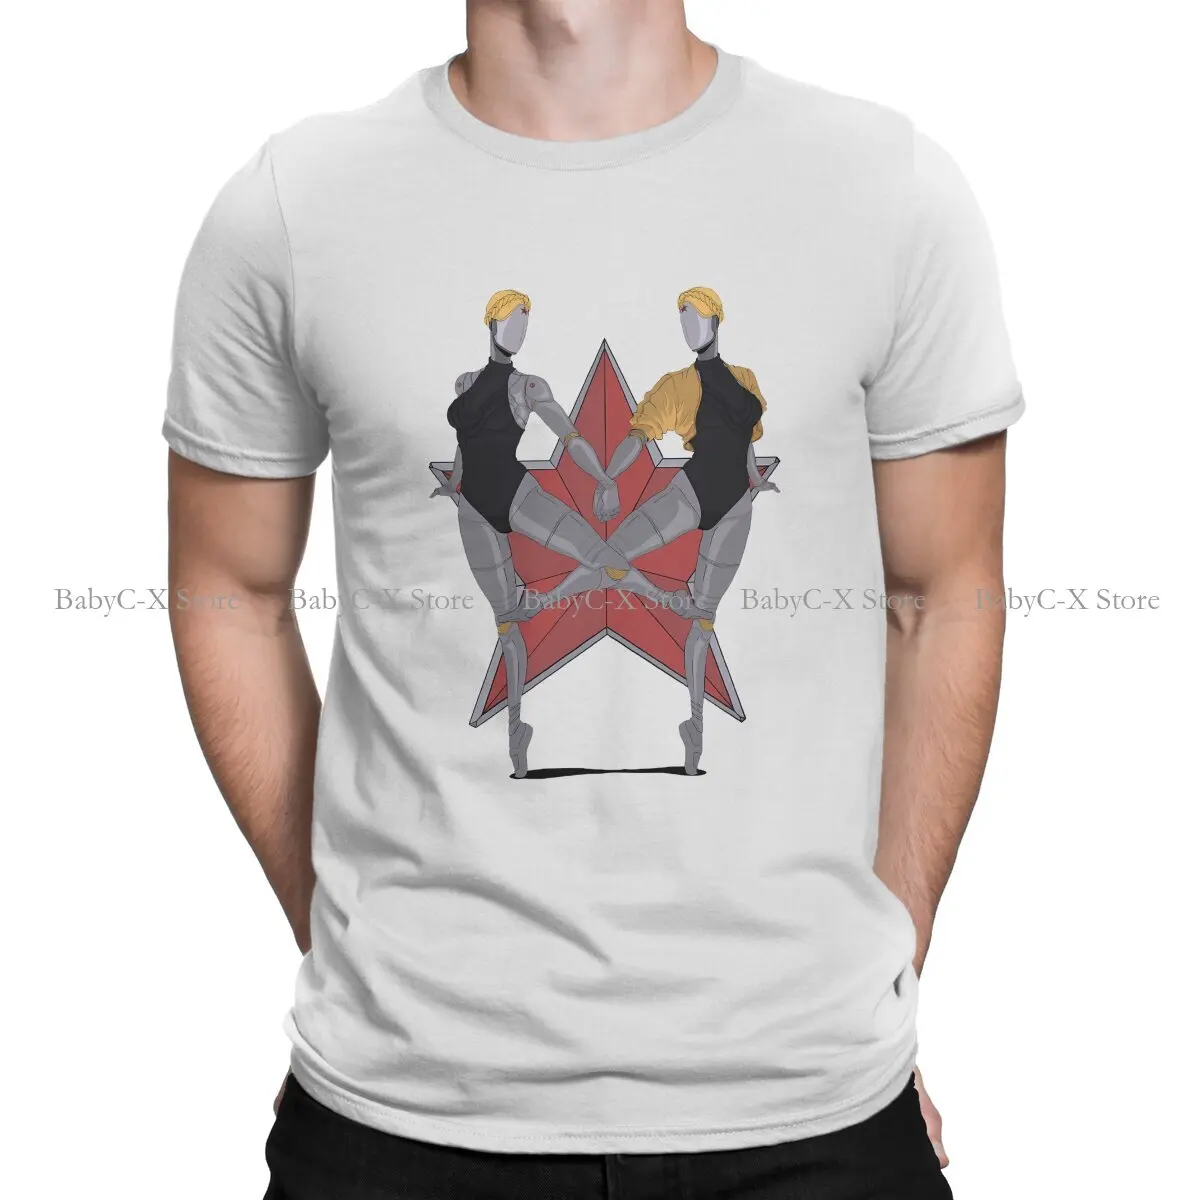 

Atomic Heart Robot Twins USSR Russia Russian FPS Game Polyester TShirt for Men Dance Basic Leisure Sweatshirts T Shirt Novelty